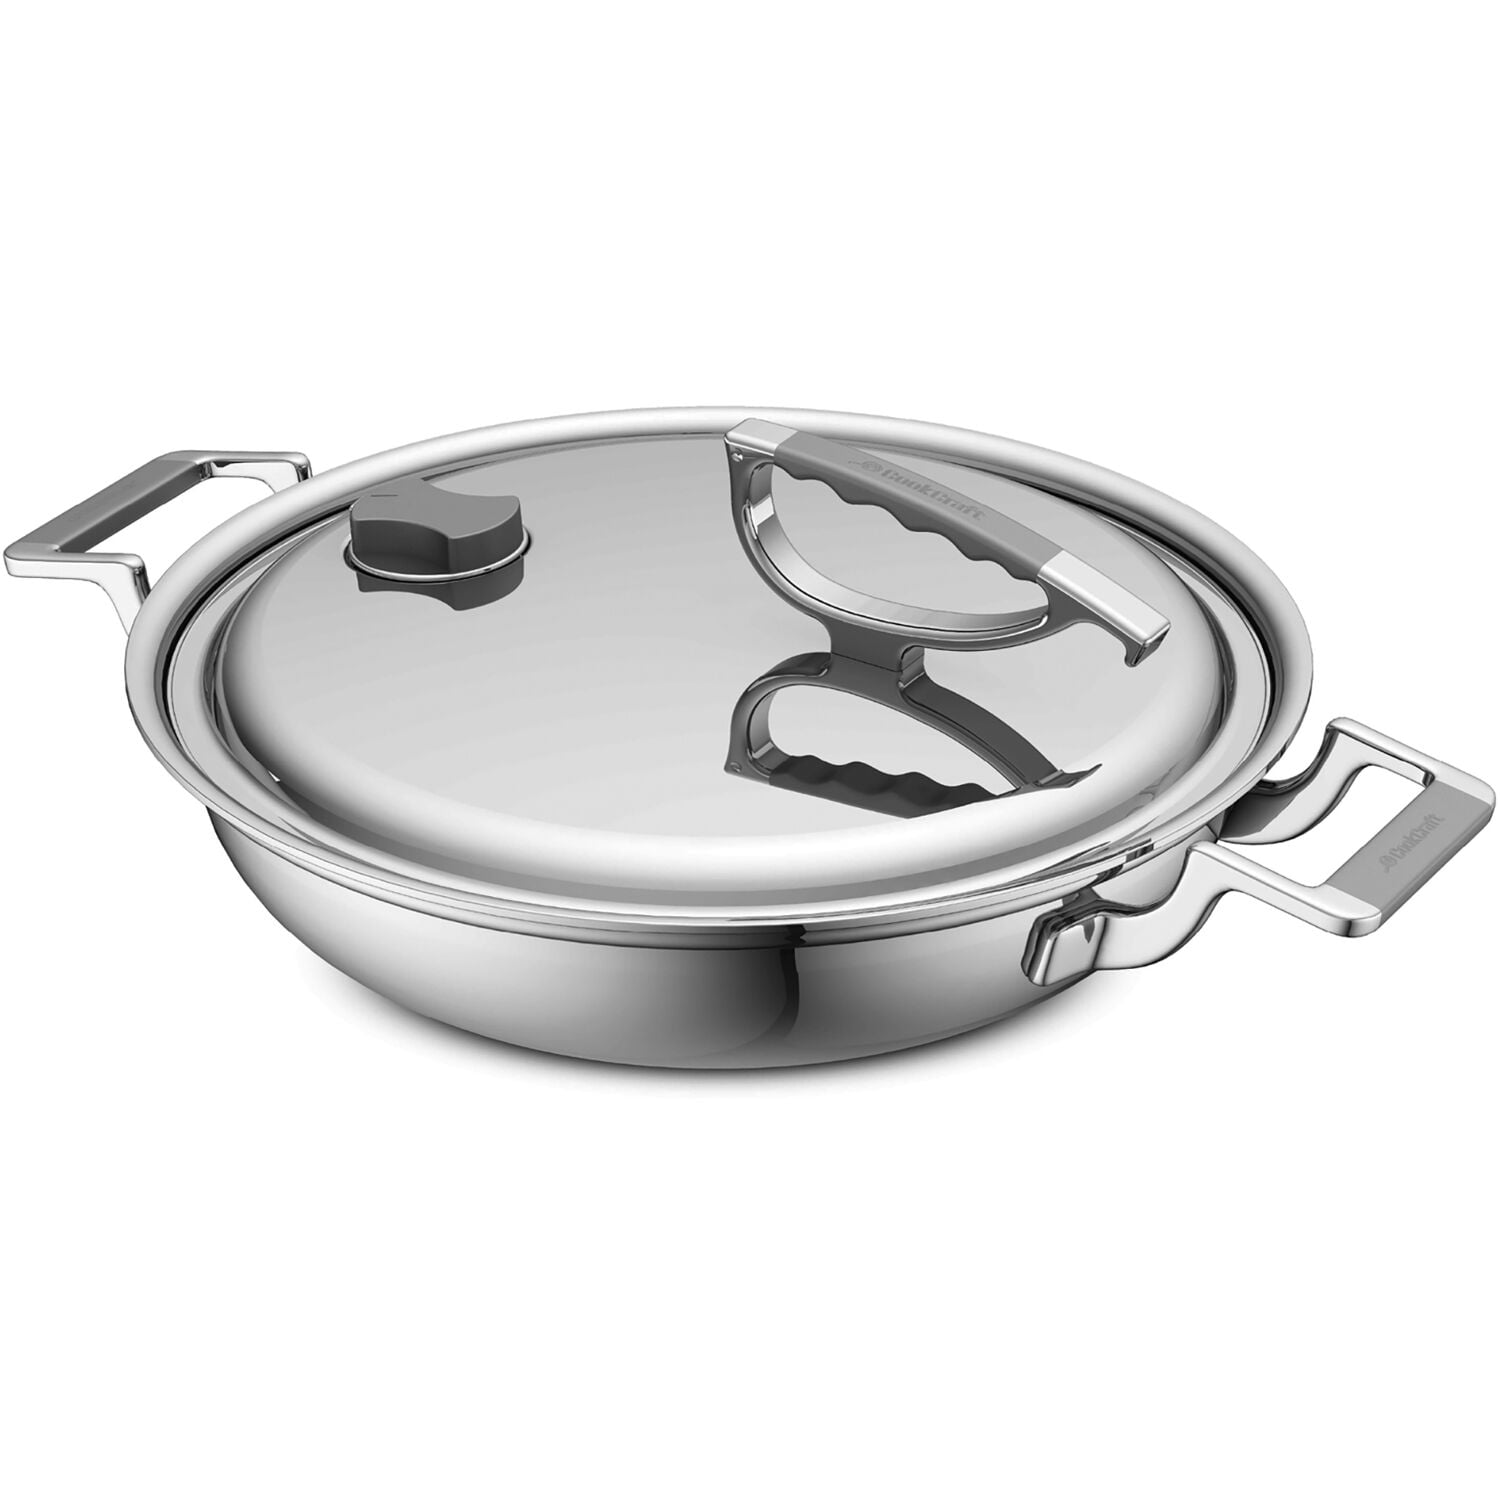 D3 Stainless 3-ply Bonded Cookware, Mini Casserole with Lid, 1 quart